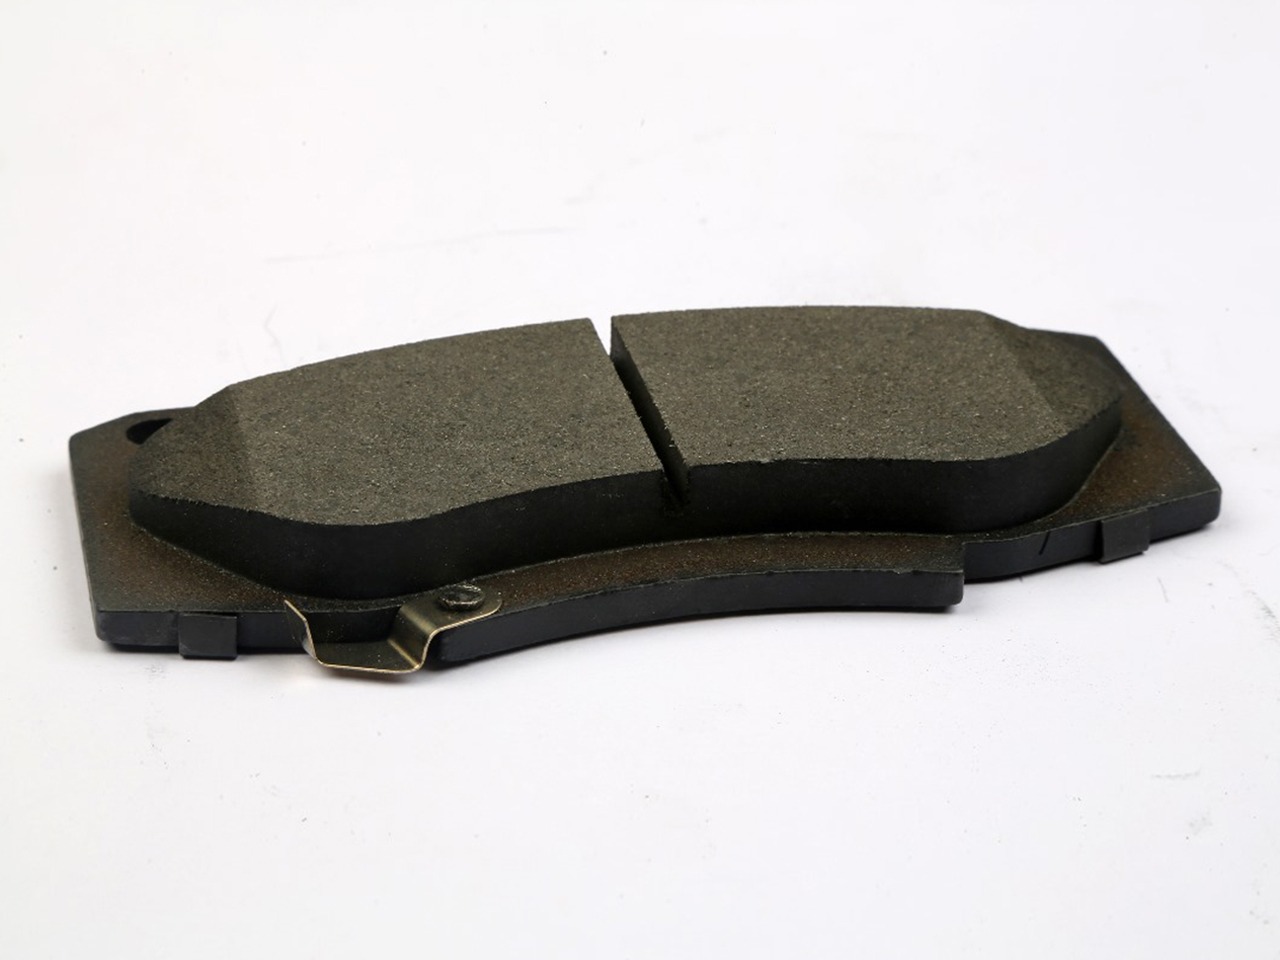 What Damage Do Non-Standard Brake Pads Do to Our Car?